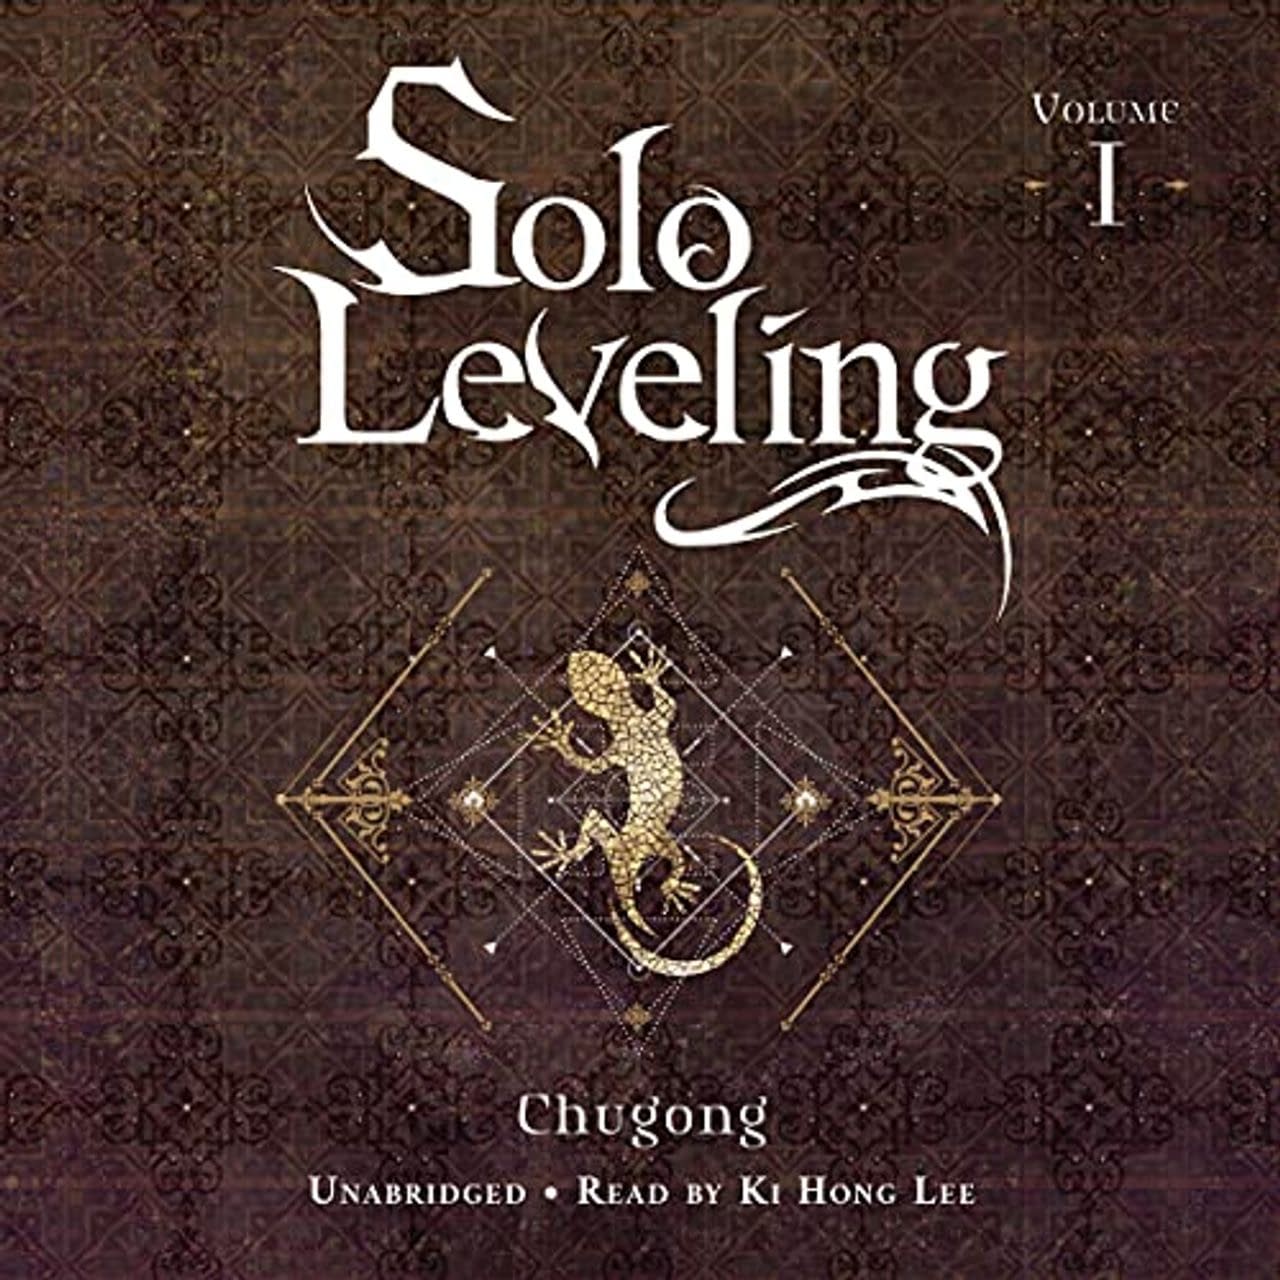 REVIEW: Solo Leveling Vol.1 Is a Thrilling Read for Both Fans